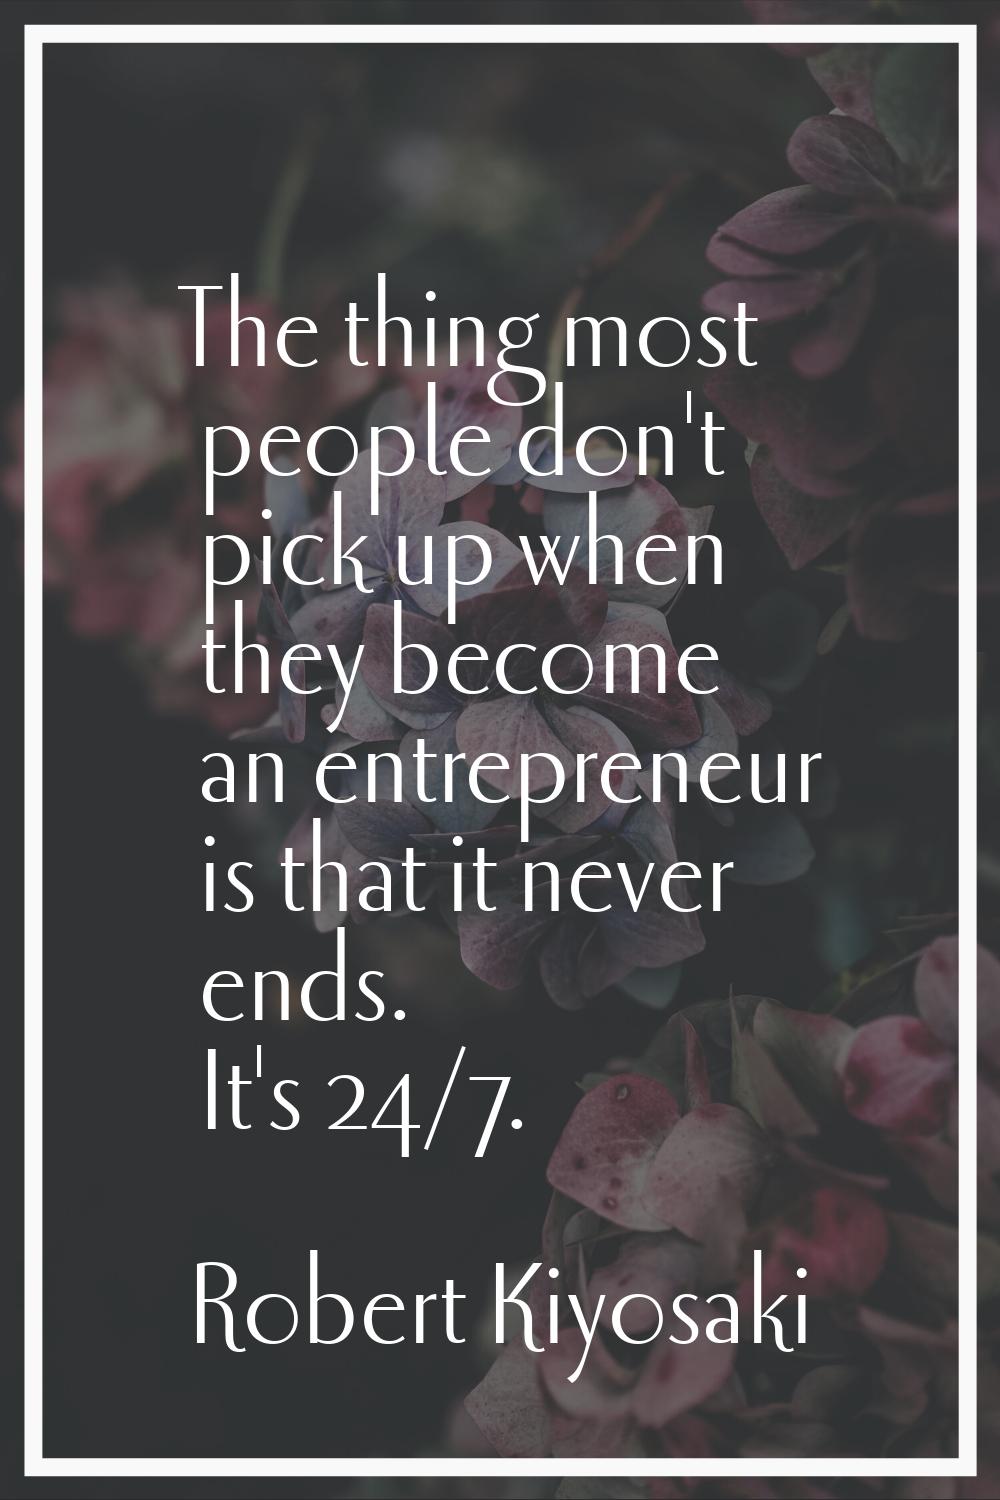 The thing most people don't pick up when they become an entrepreneur is that it never ends. It's 24